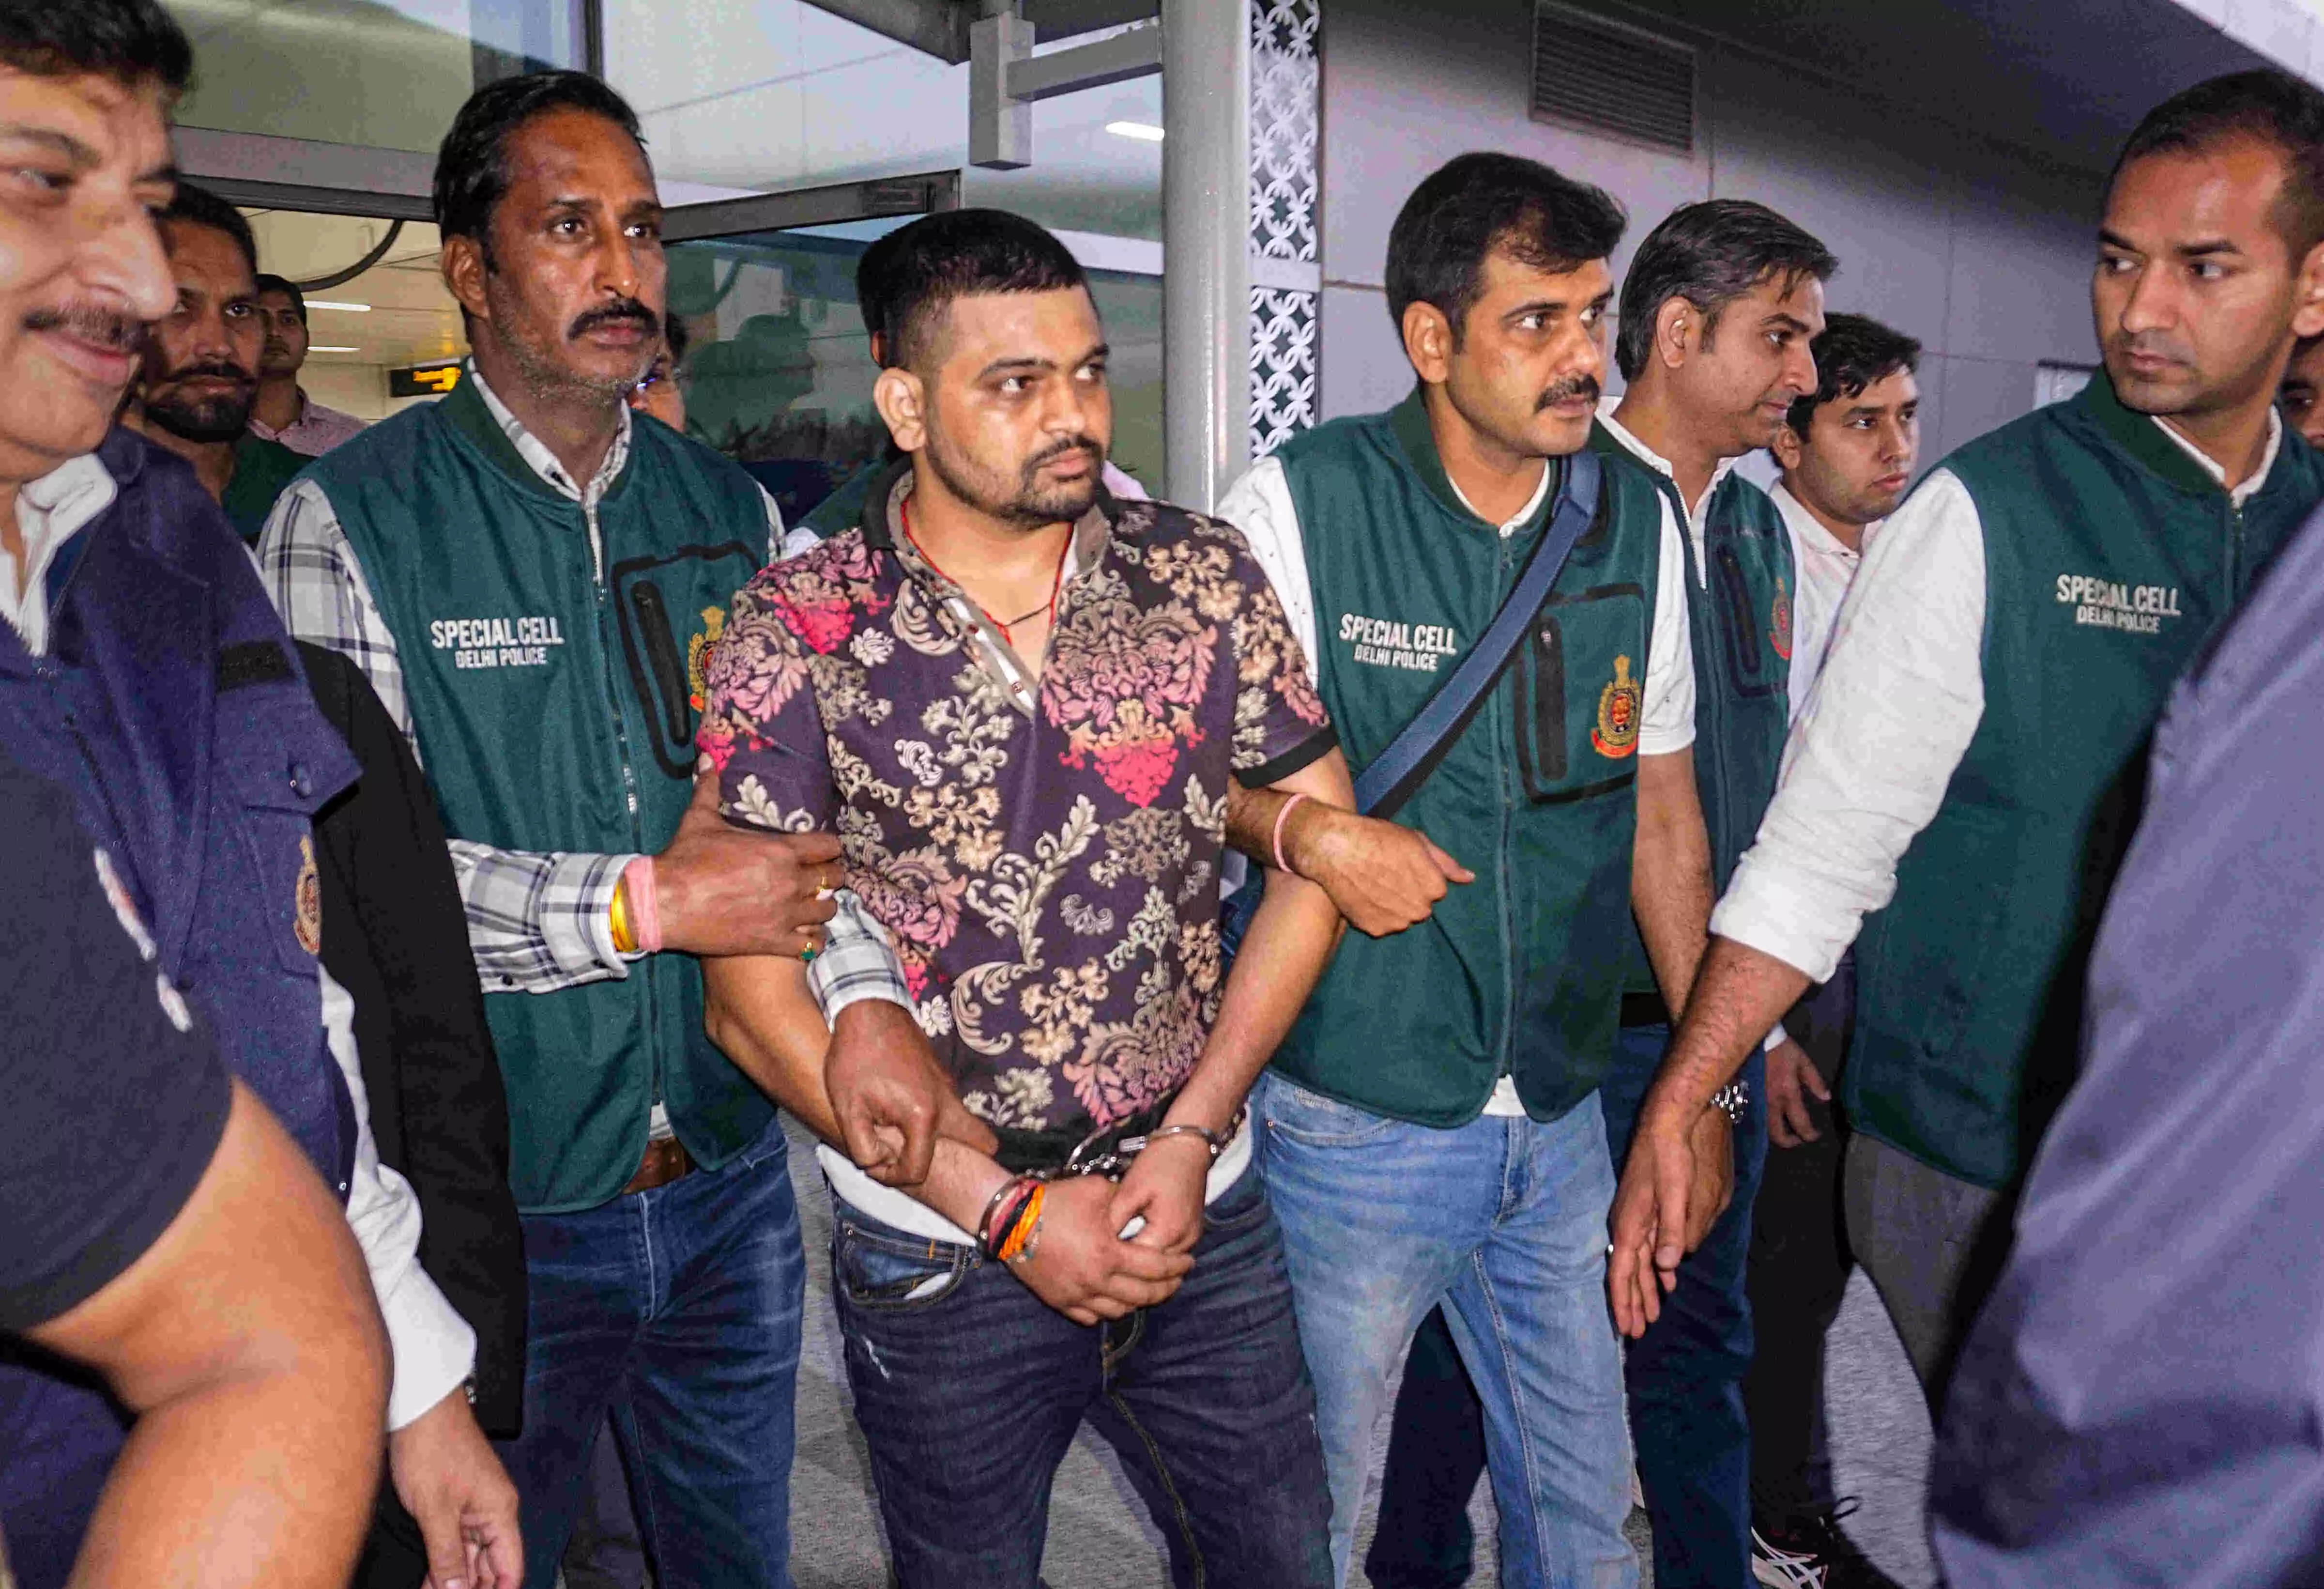 Gangster Deepak Boxer brought to India from Mexico; his aide spent Rs 55 lakh on his escape